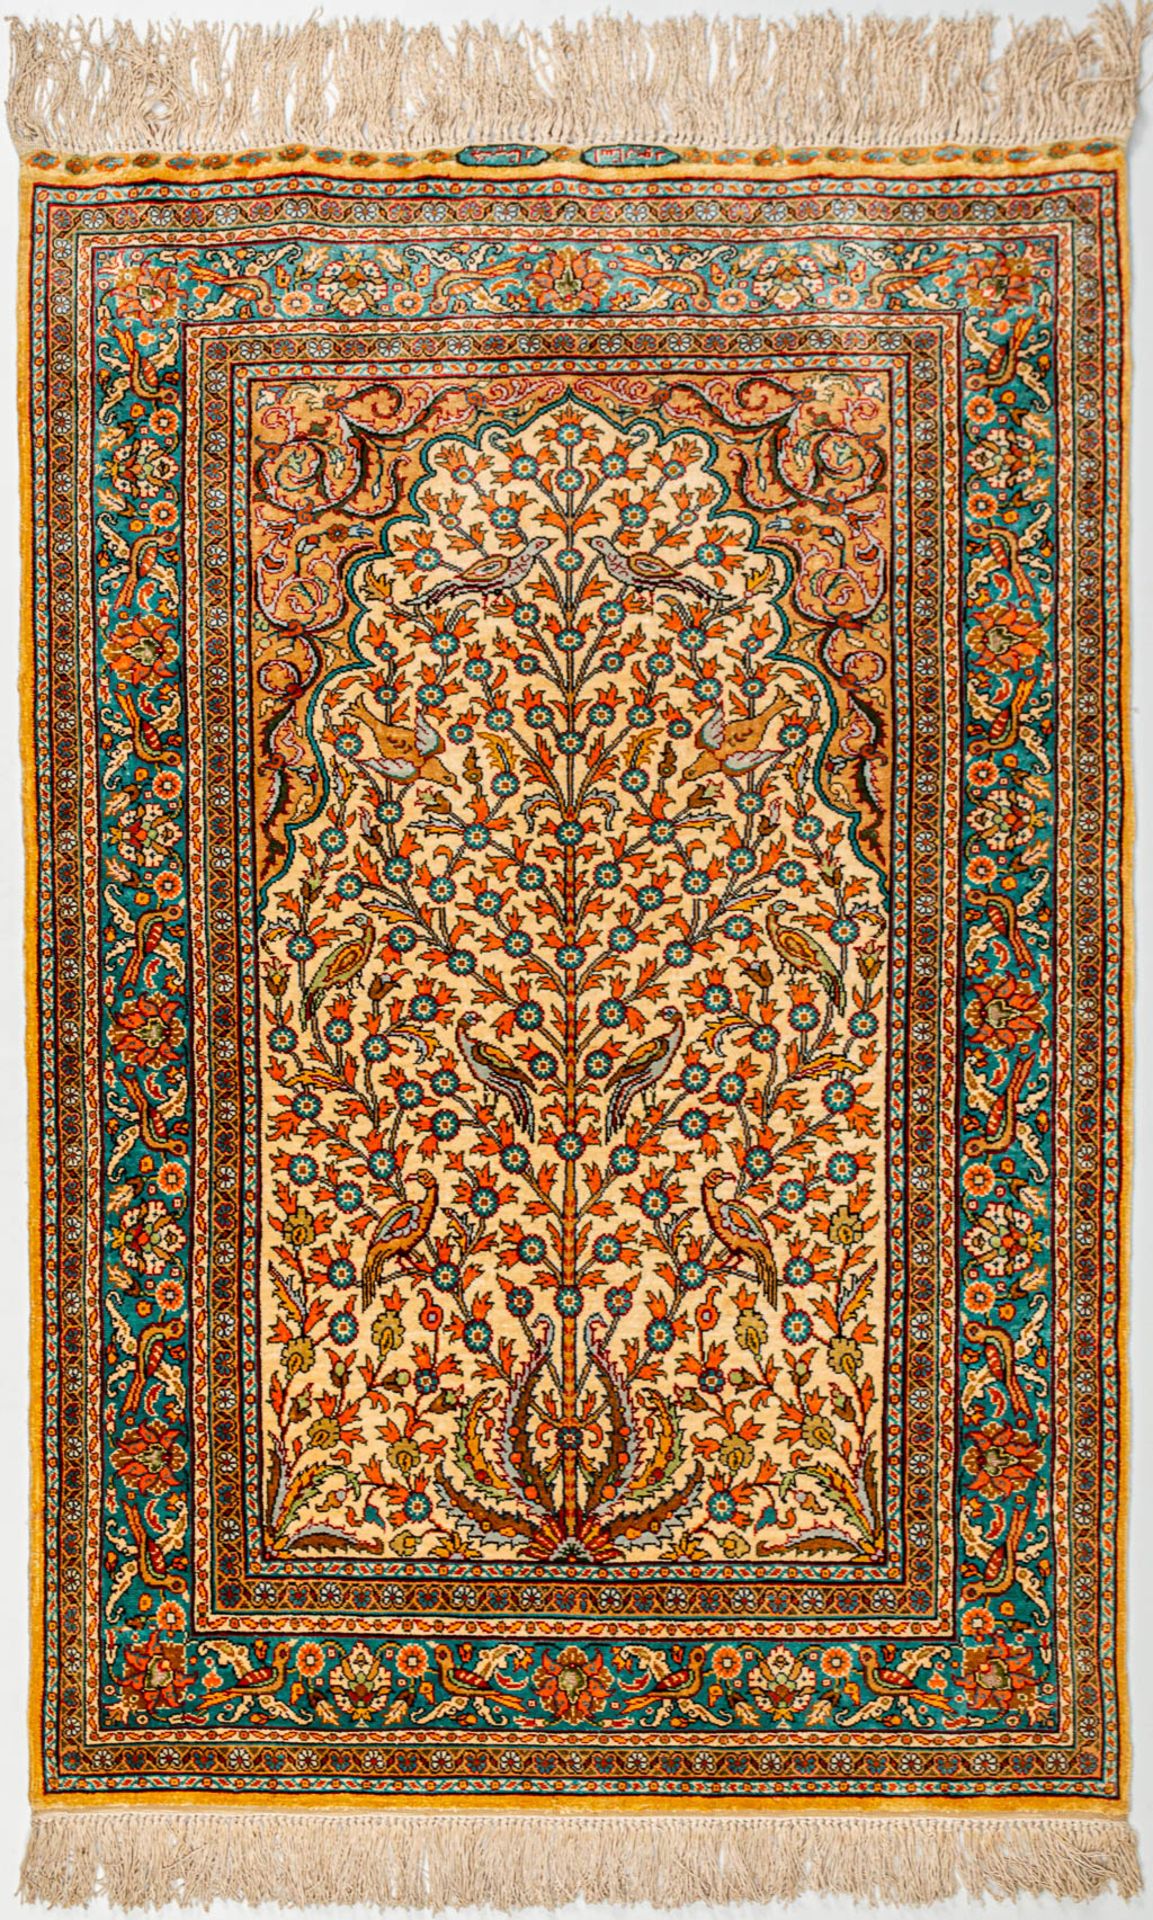 A hand-made silk carpet with 'Tree of life' decor and marked Kayseri. Signed. (112 x 75 cm) (75 x 11